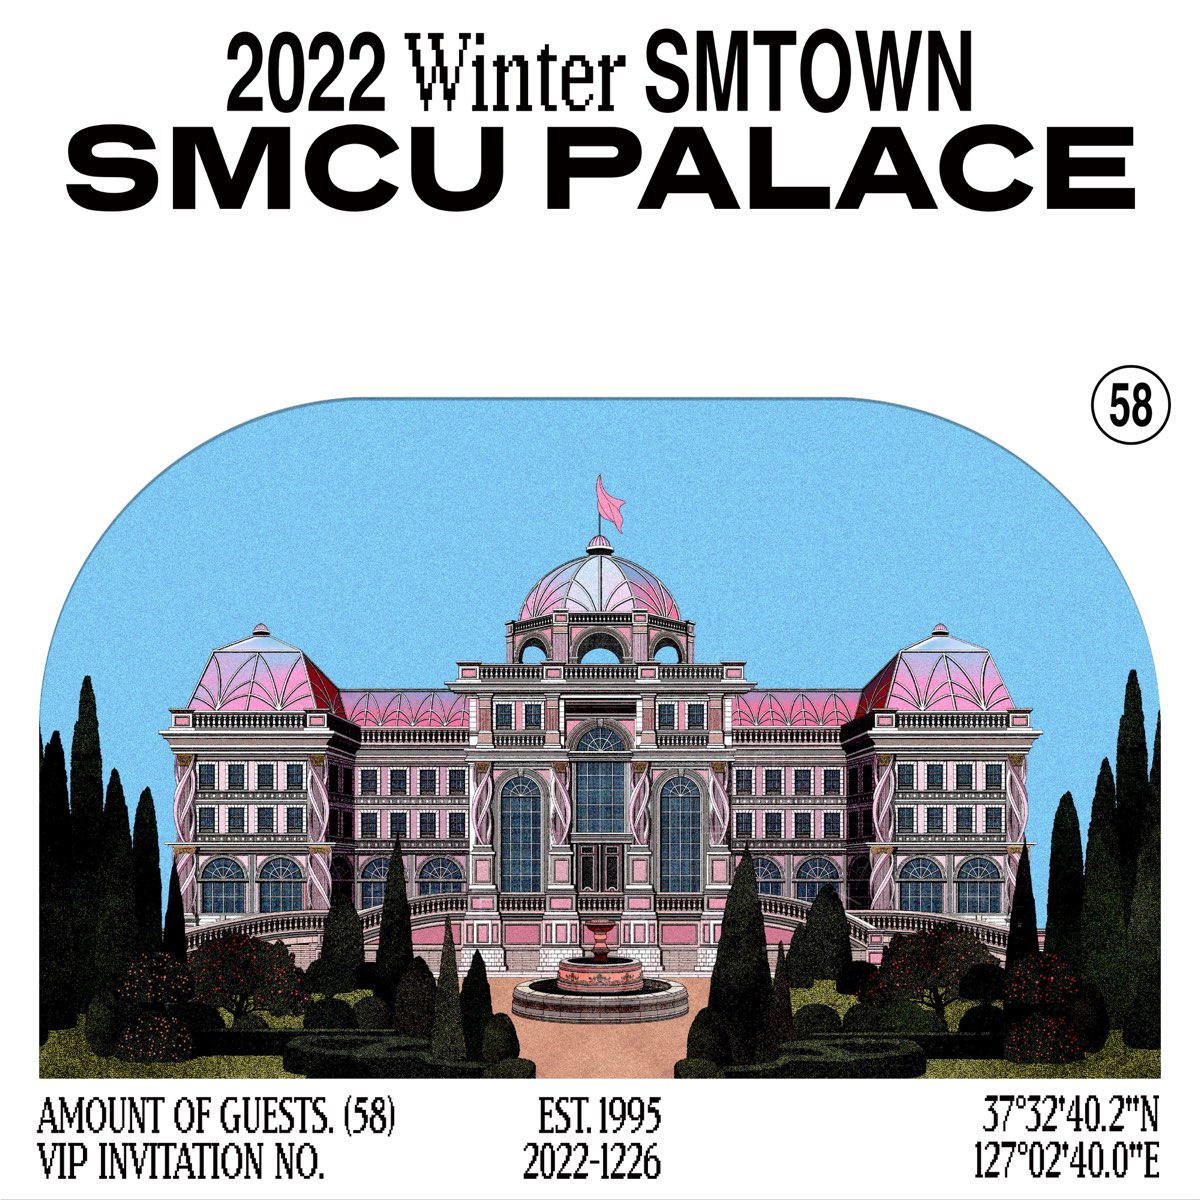 SMTOWN 2022 Winter SMTOWN : SMCU PALACE cover artwork